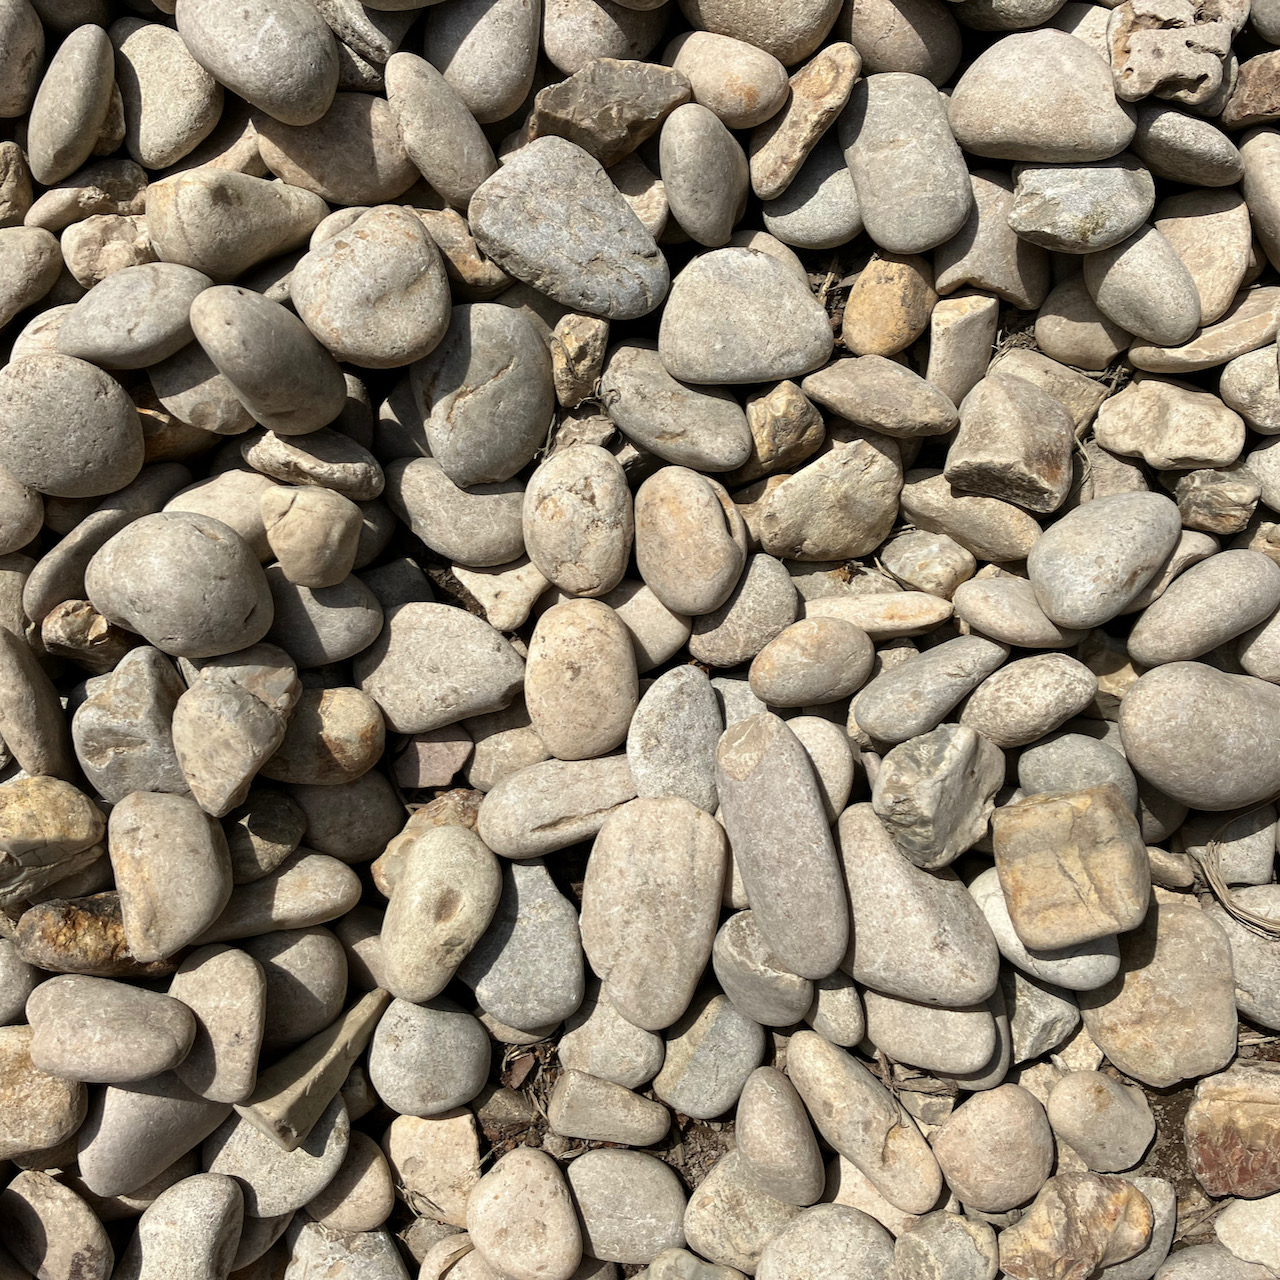 Rounded smooth river stones, mostly light grey and beige, Rome